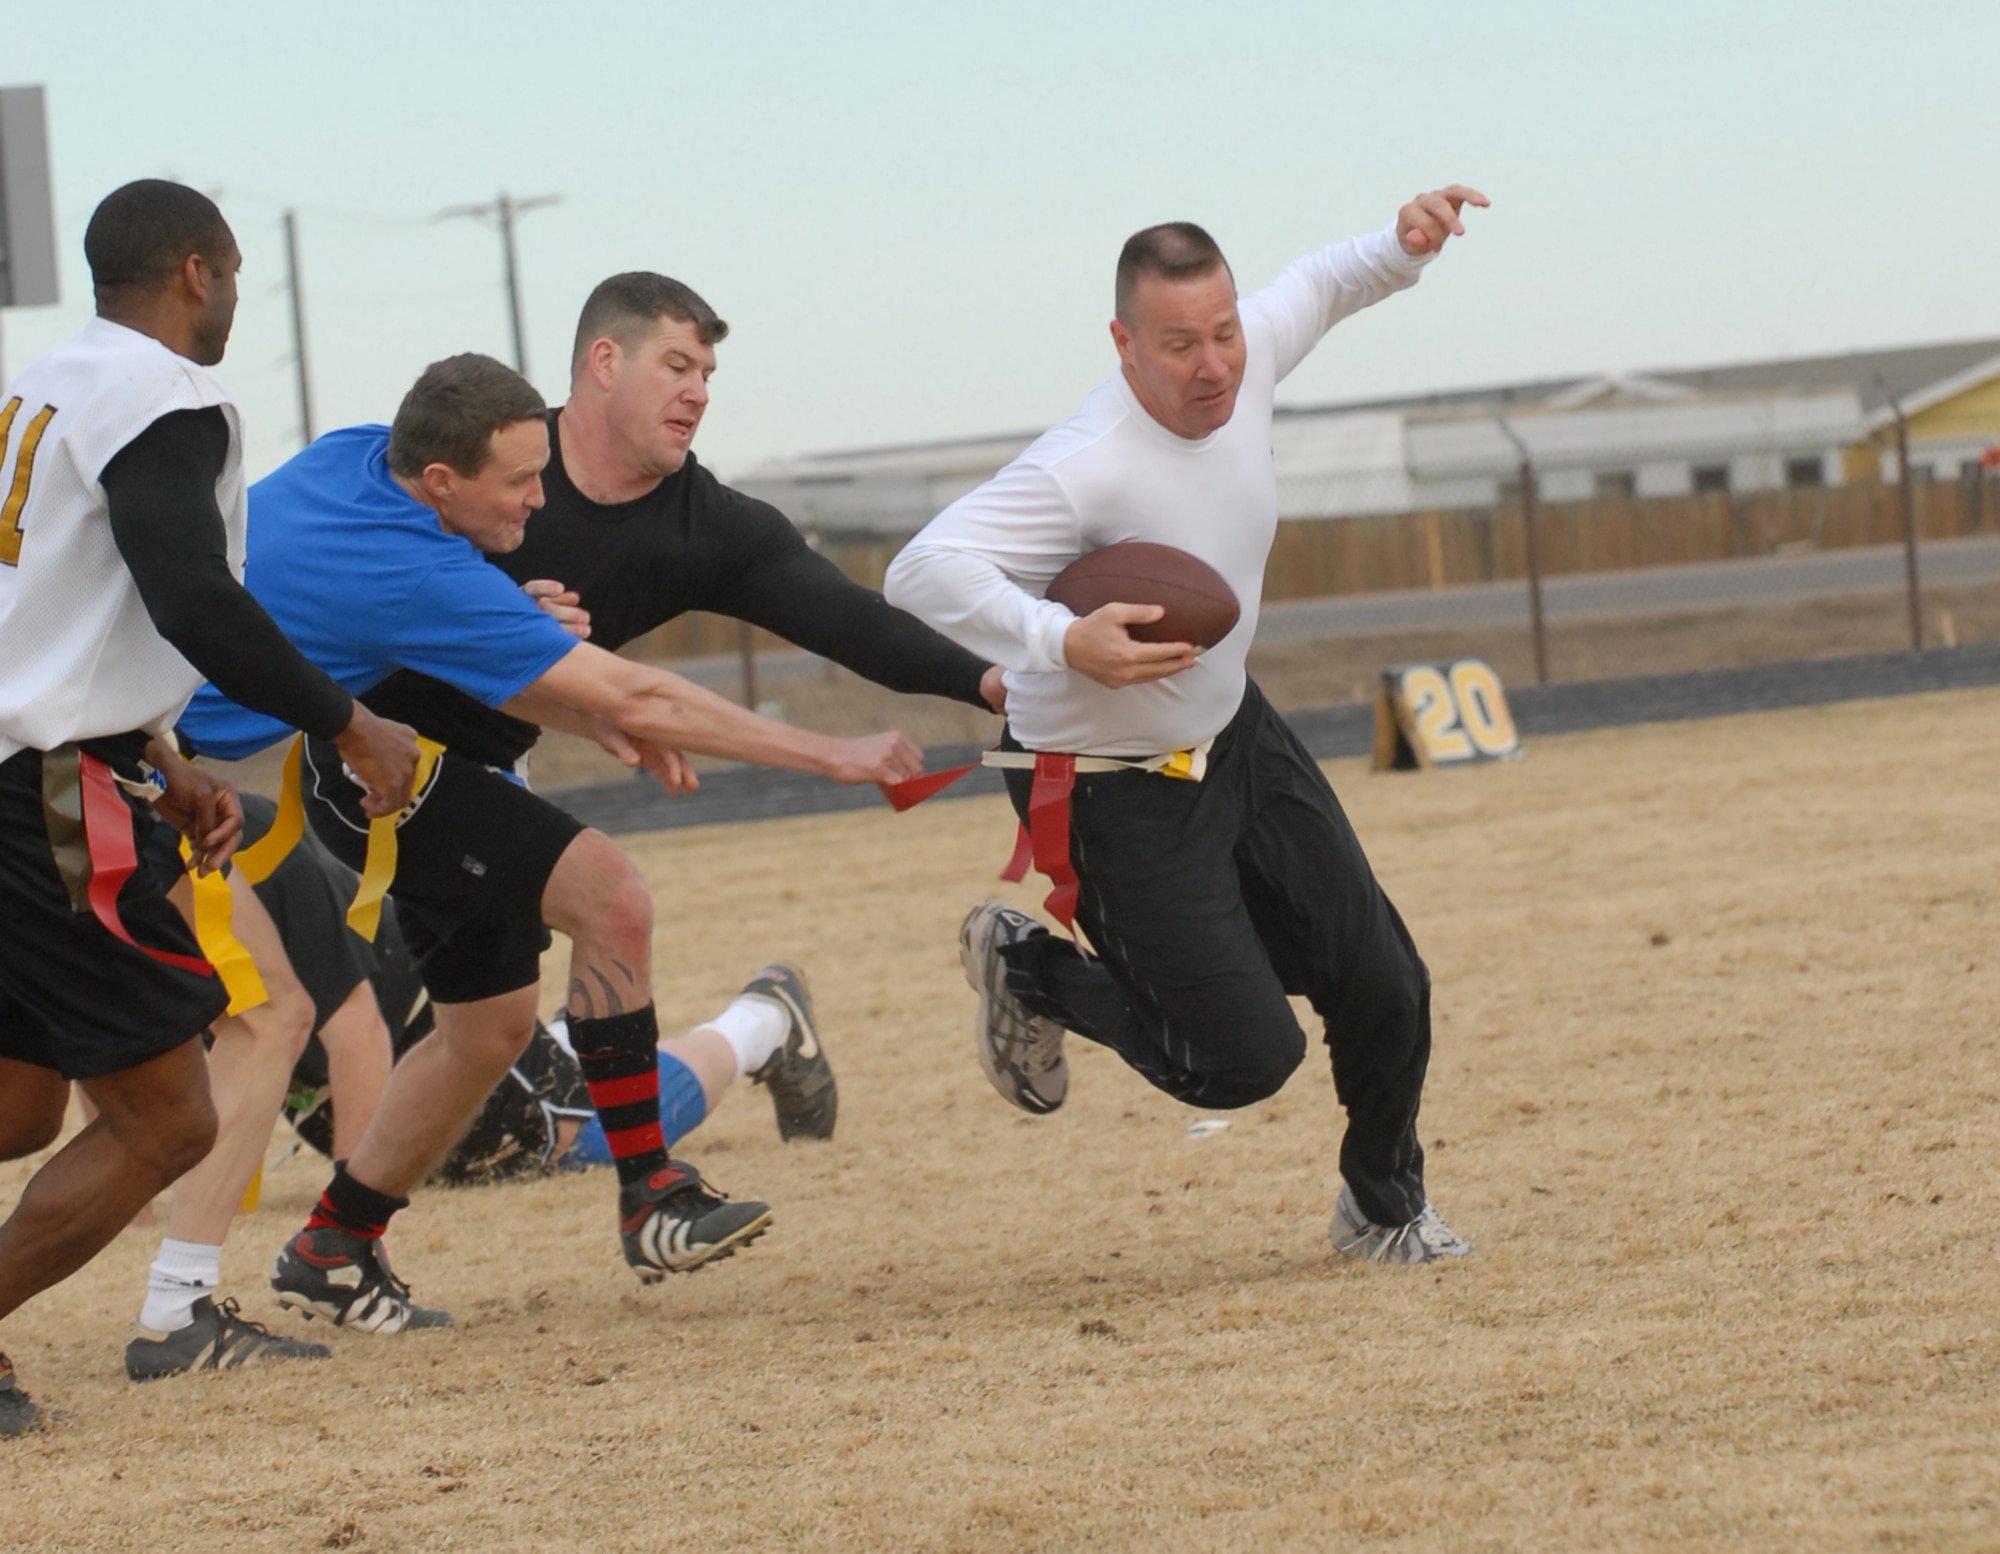 Chief player Kevin Candler tries to squeeze by Eagle members Jeff Beckford and David Ziegler during a flag football game between Buckley chiefs and first sergeants against Buckley colonels and commanders Dec. 14. The Chiefs/Shirts won 31-0. (U.S. Air Force photo by Airman 1st Class Alex Gochnour)